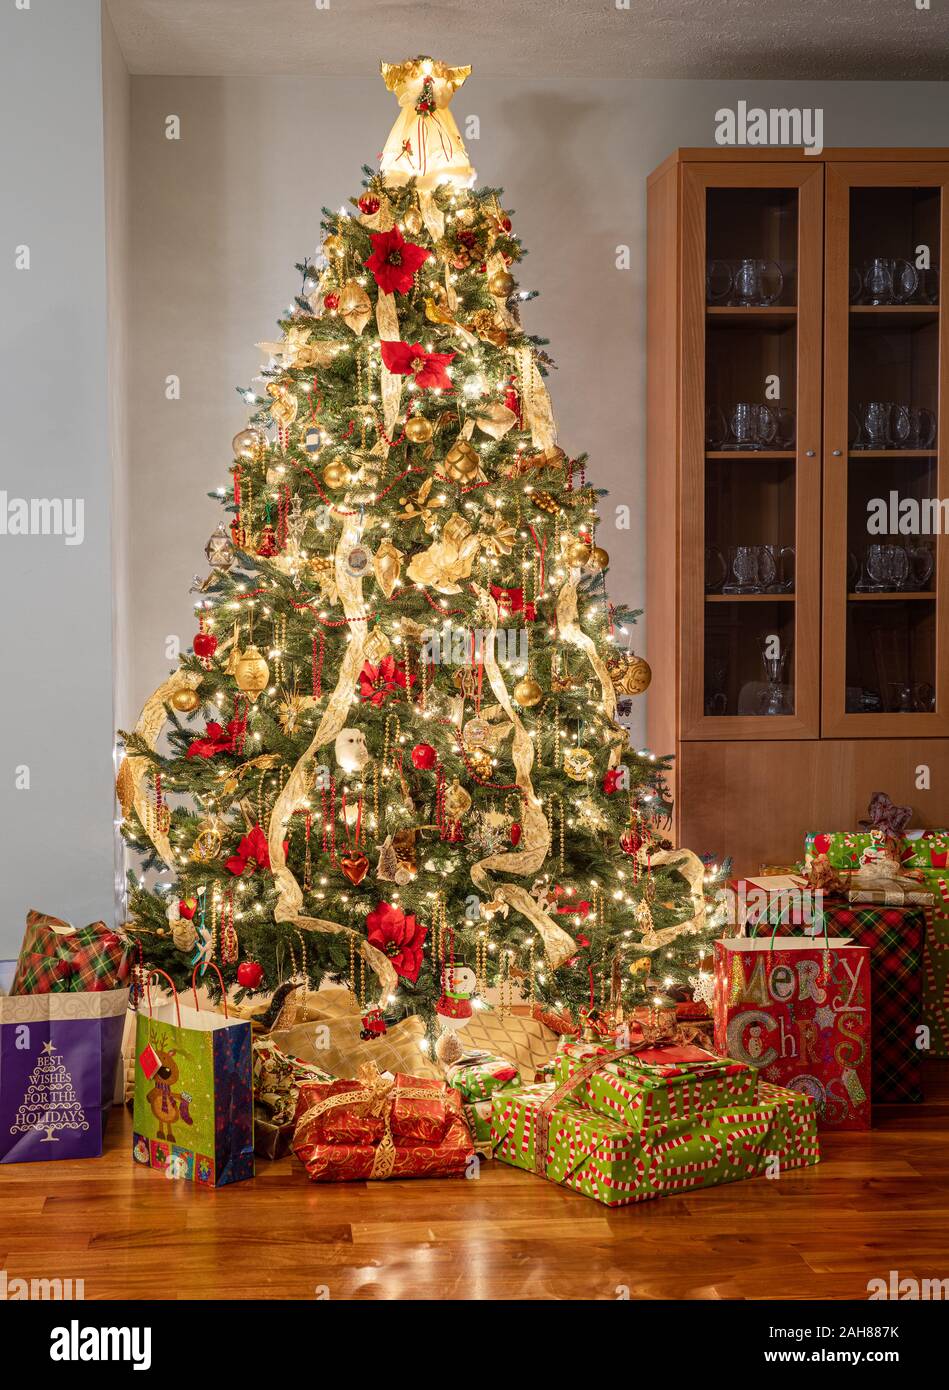 Interior of modern home with christmas tree decorated and illuminated and wrapped presents and gifts under the tree Stock Photo